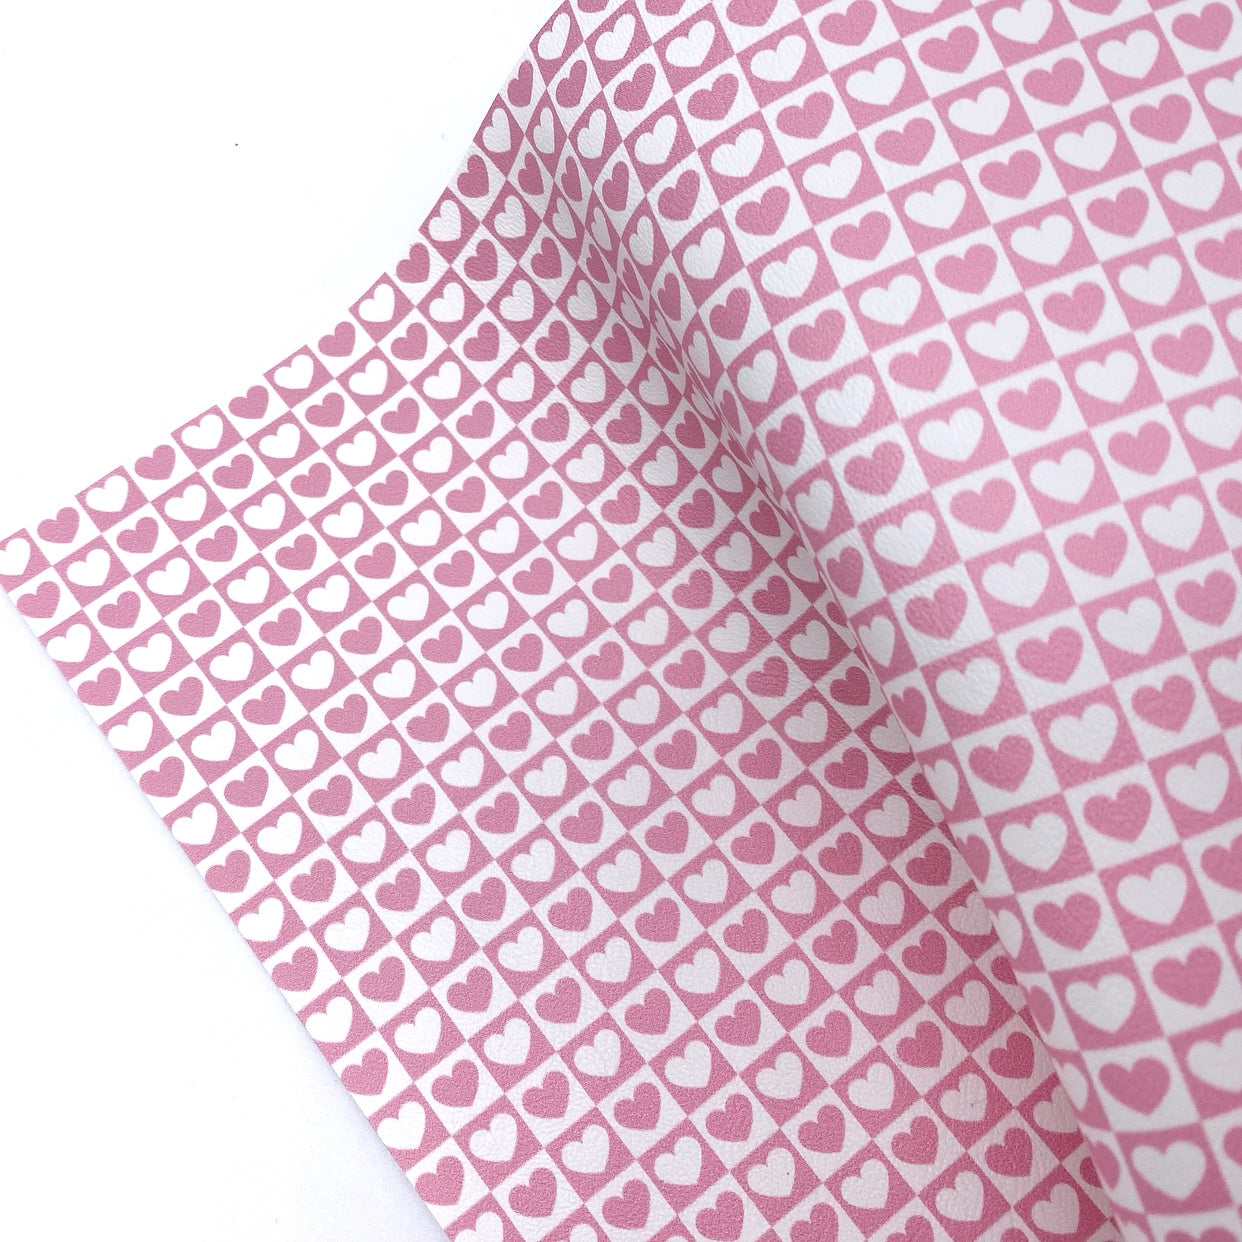 Retro Pink Check Hearts Premium Faux Leather Fabric Sheets